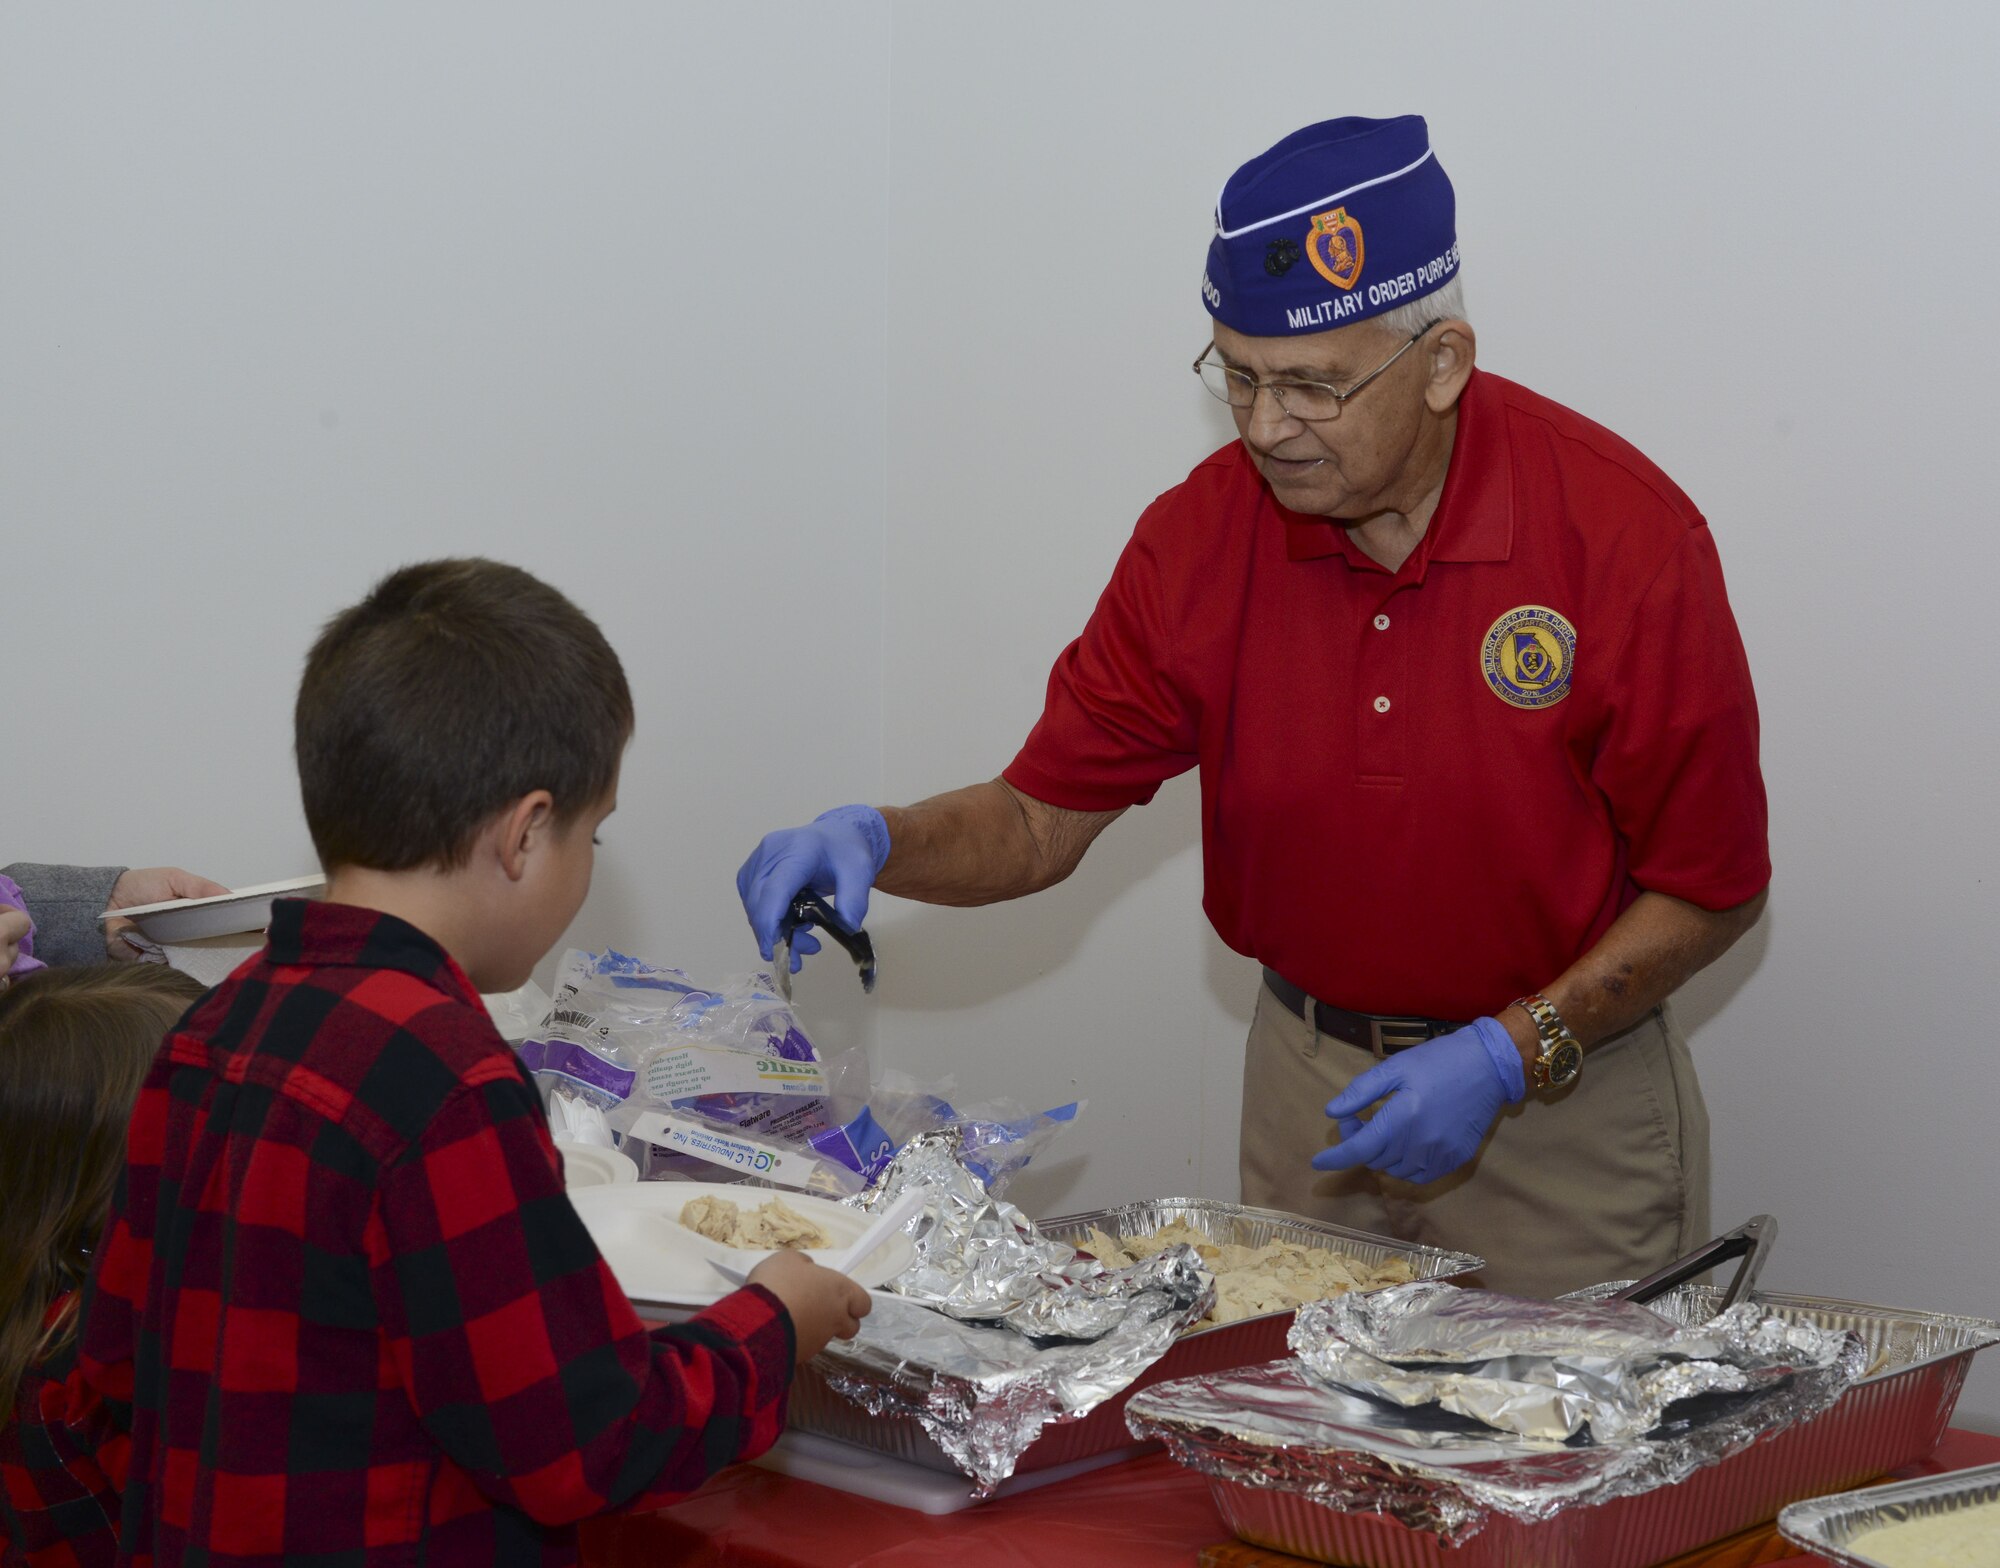 Wilson Morgan, purple heart recipient and volunteer, serves turkey during a holiday party, Dec. 15, 2017, at Moody Air Force Base, Ga. The Airman and Family Readiness Center hosted the event for families of deployed or remote-tour Airmen, and families enrolled in the Exceptional Family Member Program. During the party, families enjoyed a turkey dinner, played games, made arts and crafts for their loved ones and shared a special moment with Santa Claus. (U.S. Air Force photo by Senior Airman Lauren M. Sprunk)